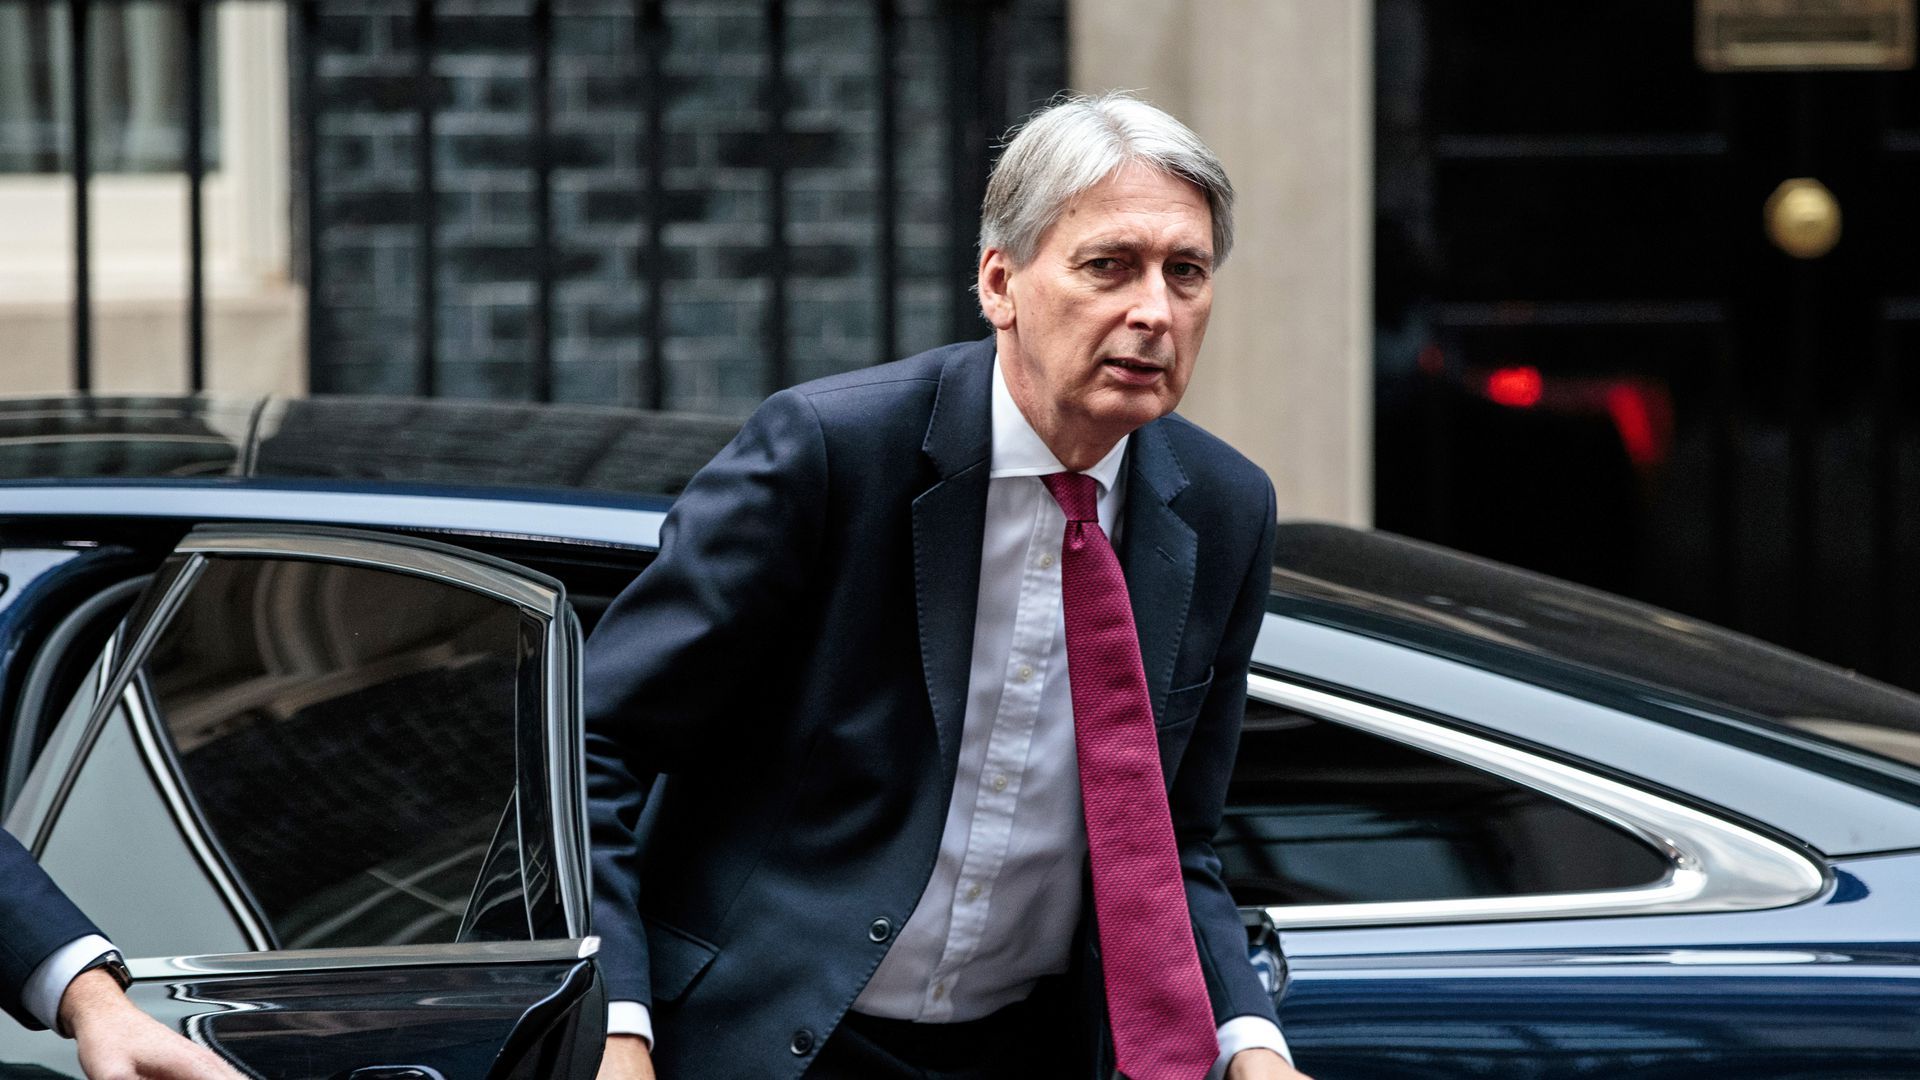 U.K. Chancellor Philip Hammond steps out of a car while glancing at the camera